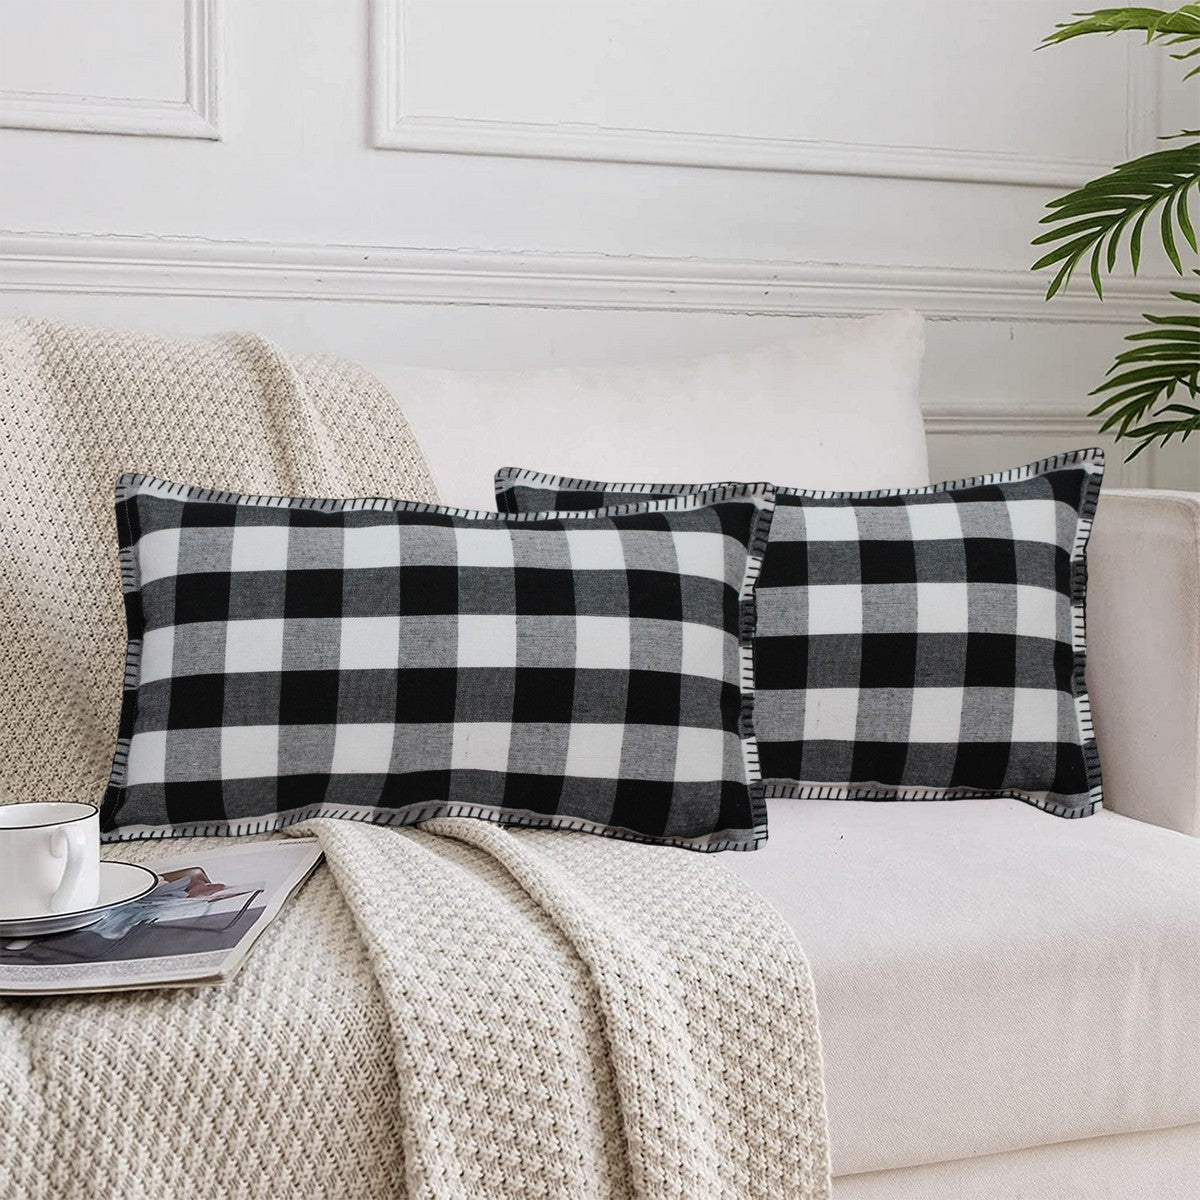 Lushomes Rectangle Cushion Cover with Blanket Stitch, Cotton Sofa Pillow Cover Set of 2, 12x20 Inch, Big Checks, Black and White Checks, Pillow Cushions Covers (Pack of 2, 30x50 Cms)